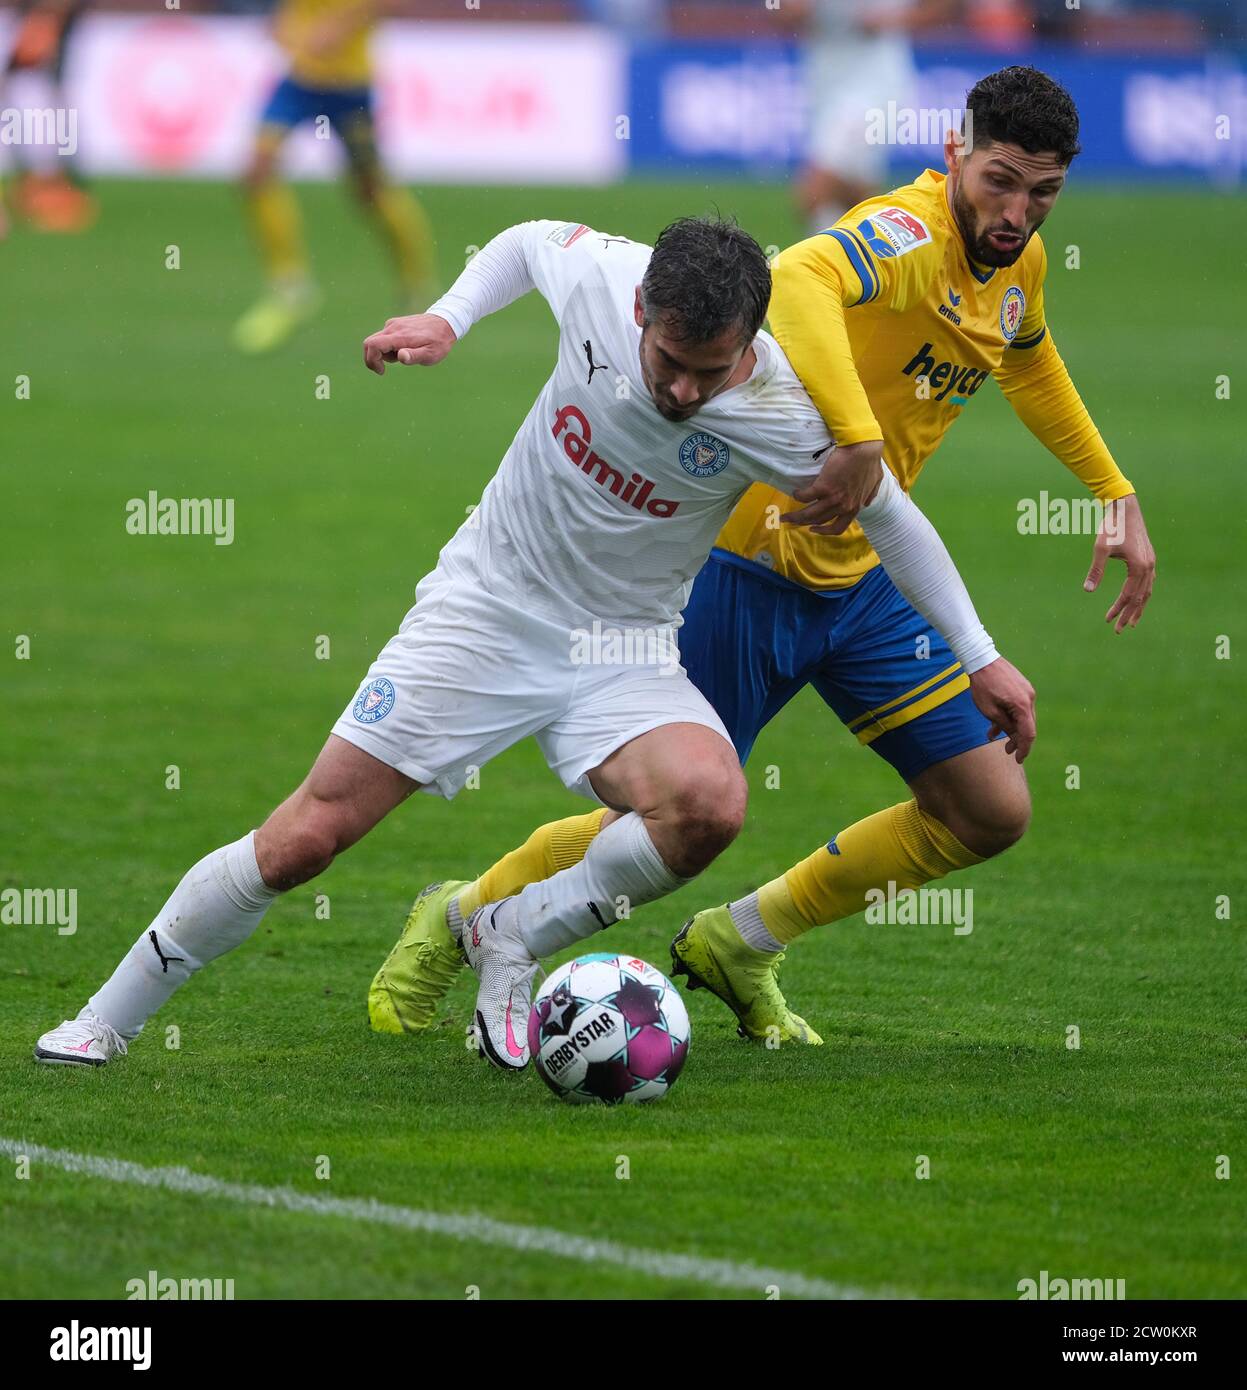 26 September 2020, Lower Saxony, Brunswick: Football: 2nd Bundesliga, Eintracht Braunschweig - Holstein Kiel, 2nd matchday at the Eintracht stadium. Braunschweig's Fabio Kaufmann (r) and Kiels Fin Bartels fight for the ball. Photo: Peter Steffen/dpa - IMPORTANT NOTE: In accordance with the regulations of the DFL Deutsche Fußball Liga and the DFB Deutscher Fußball-Bund, it is prohibited to exploit or have exploited in the stadium and/or from the game taken photographs in the form of sequence images and/or video-like photo series. Stock Photo